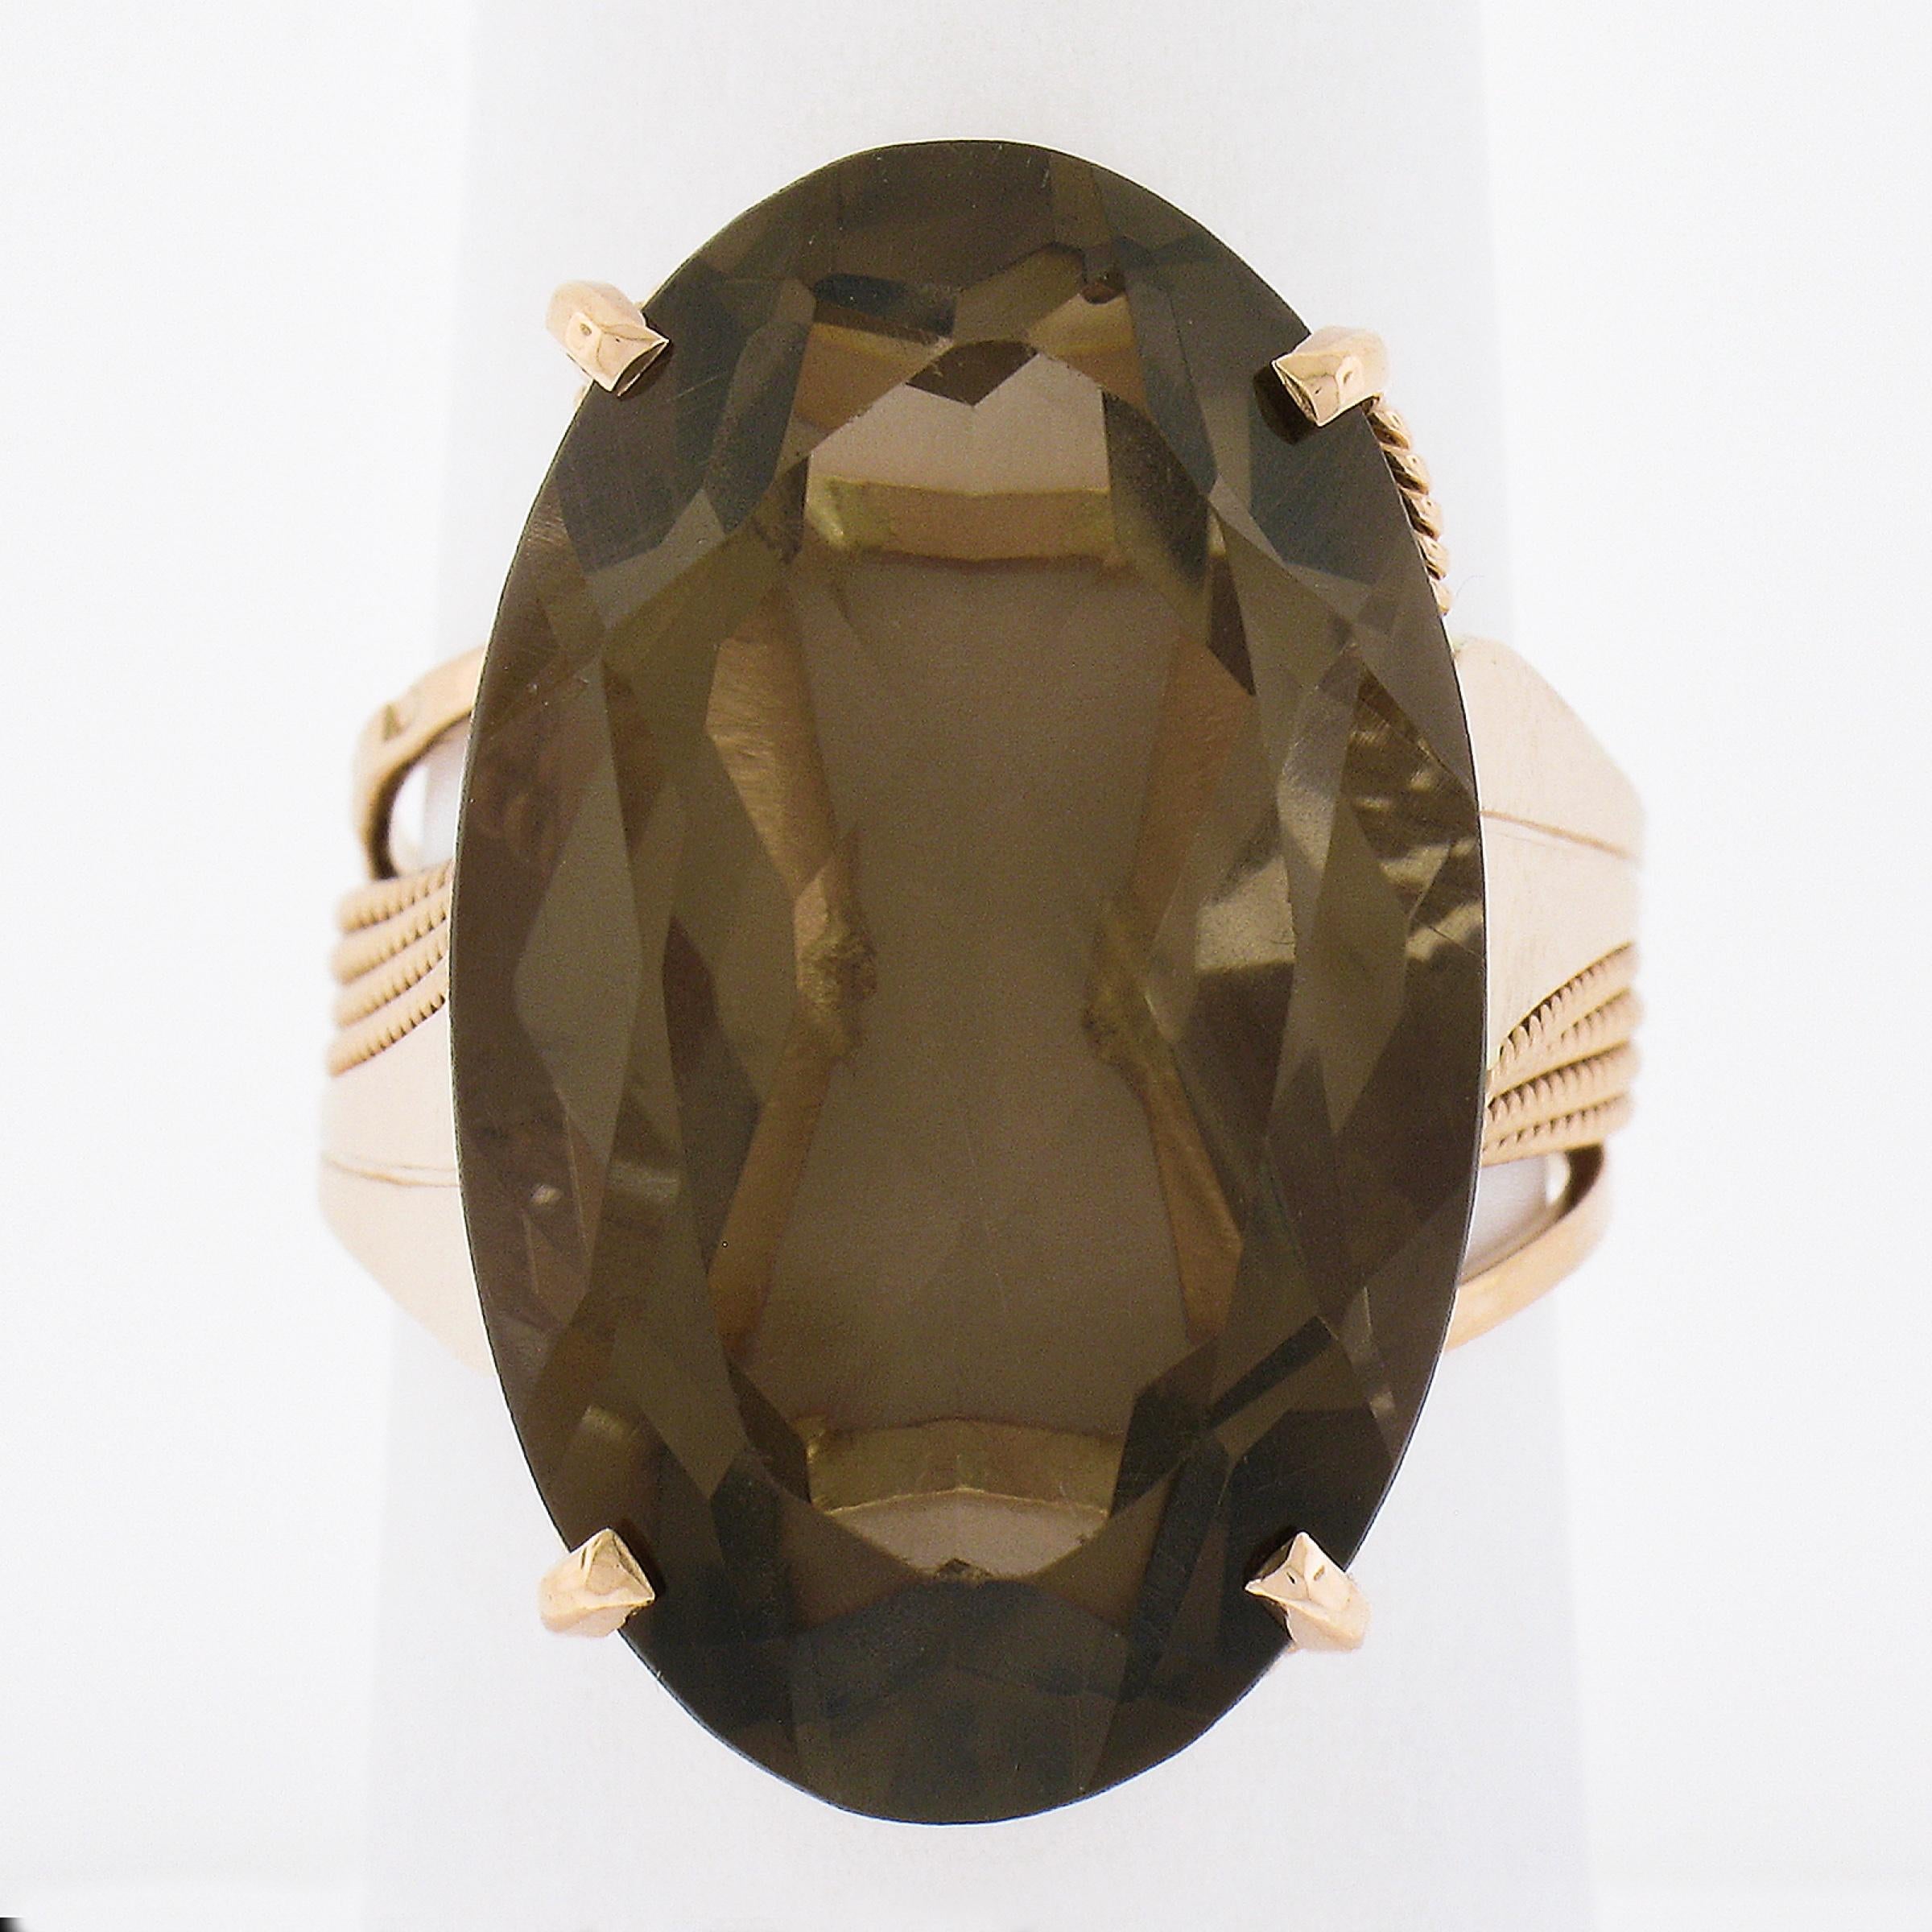 --Stone(s):--
(1) Natural Genuine Smoky Quartz - Oval Cut - Prong Set - Transparent Brown Color - 25.5x15.7mm (approx.)

Material: Solid 14K Rose Gold
Weight: 10.02 Grams
Ring Size: 9.0 (Fitted on a finger. We can custom size this ring - please